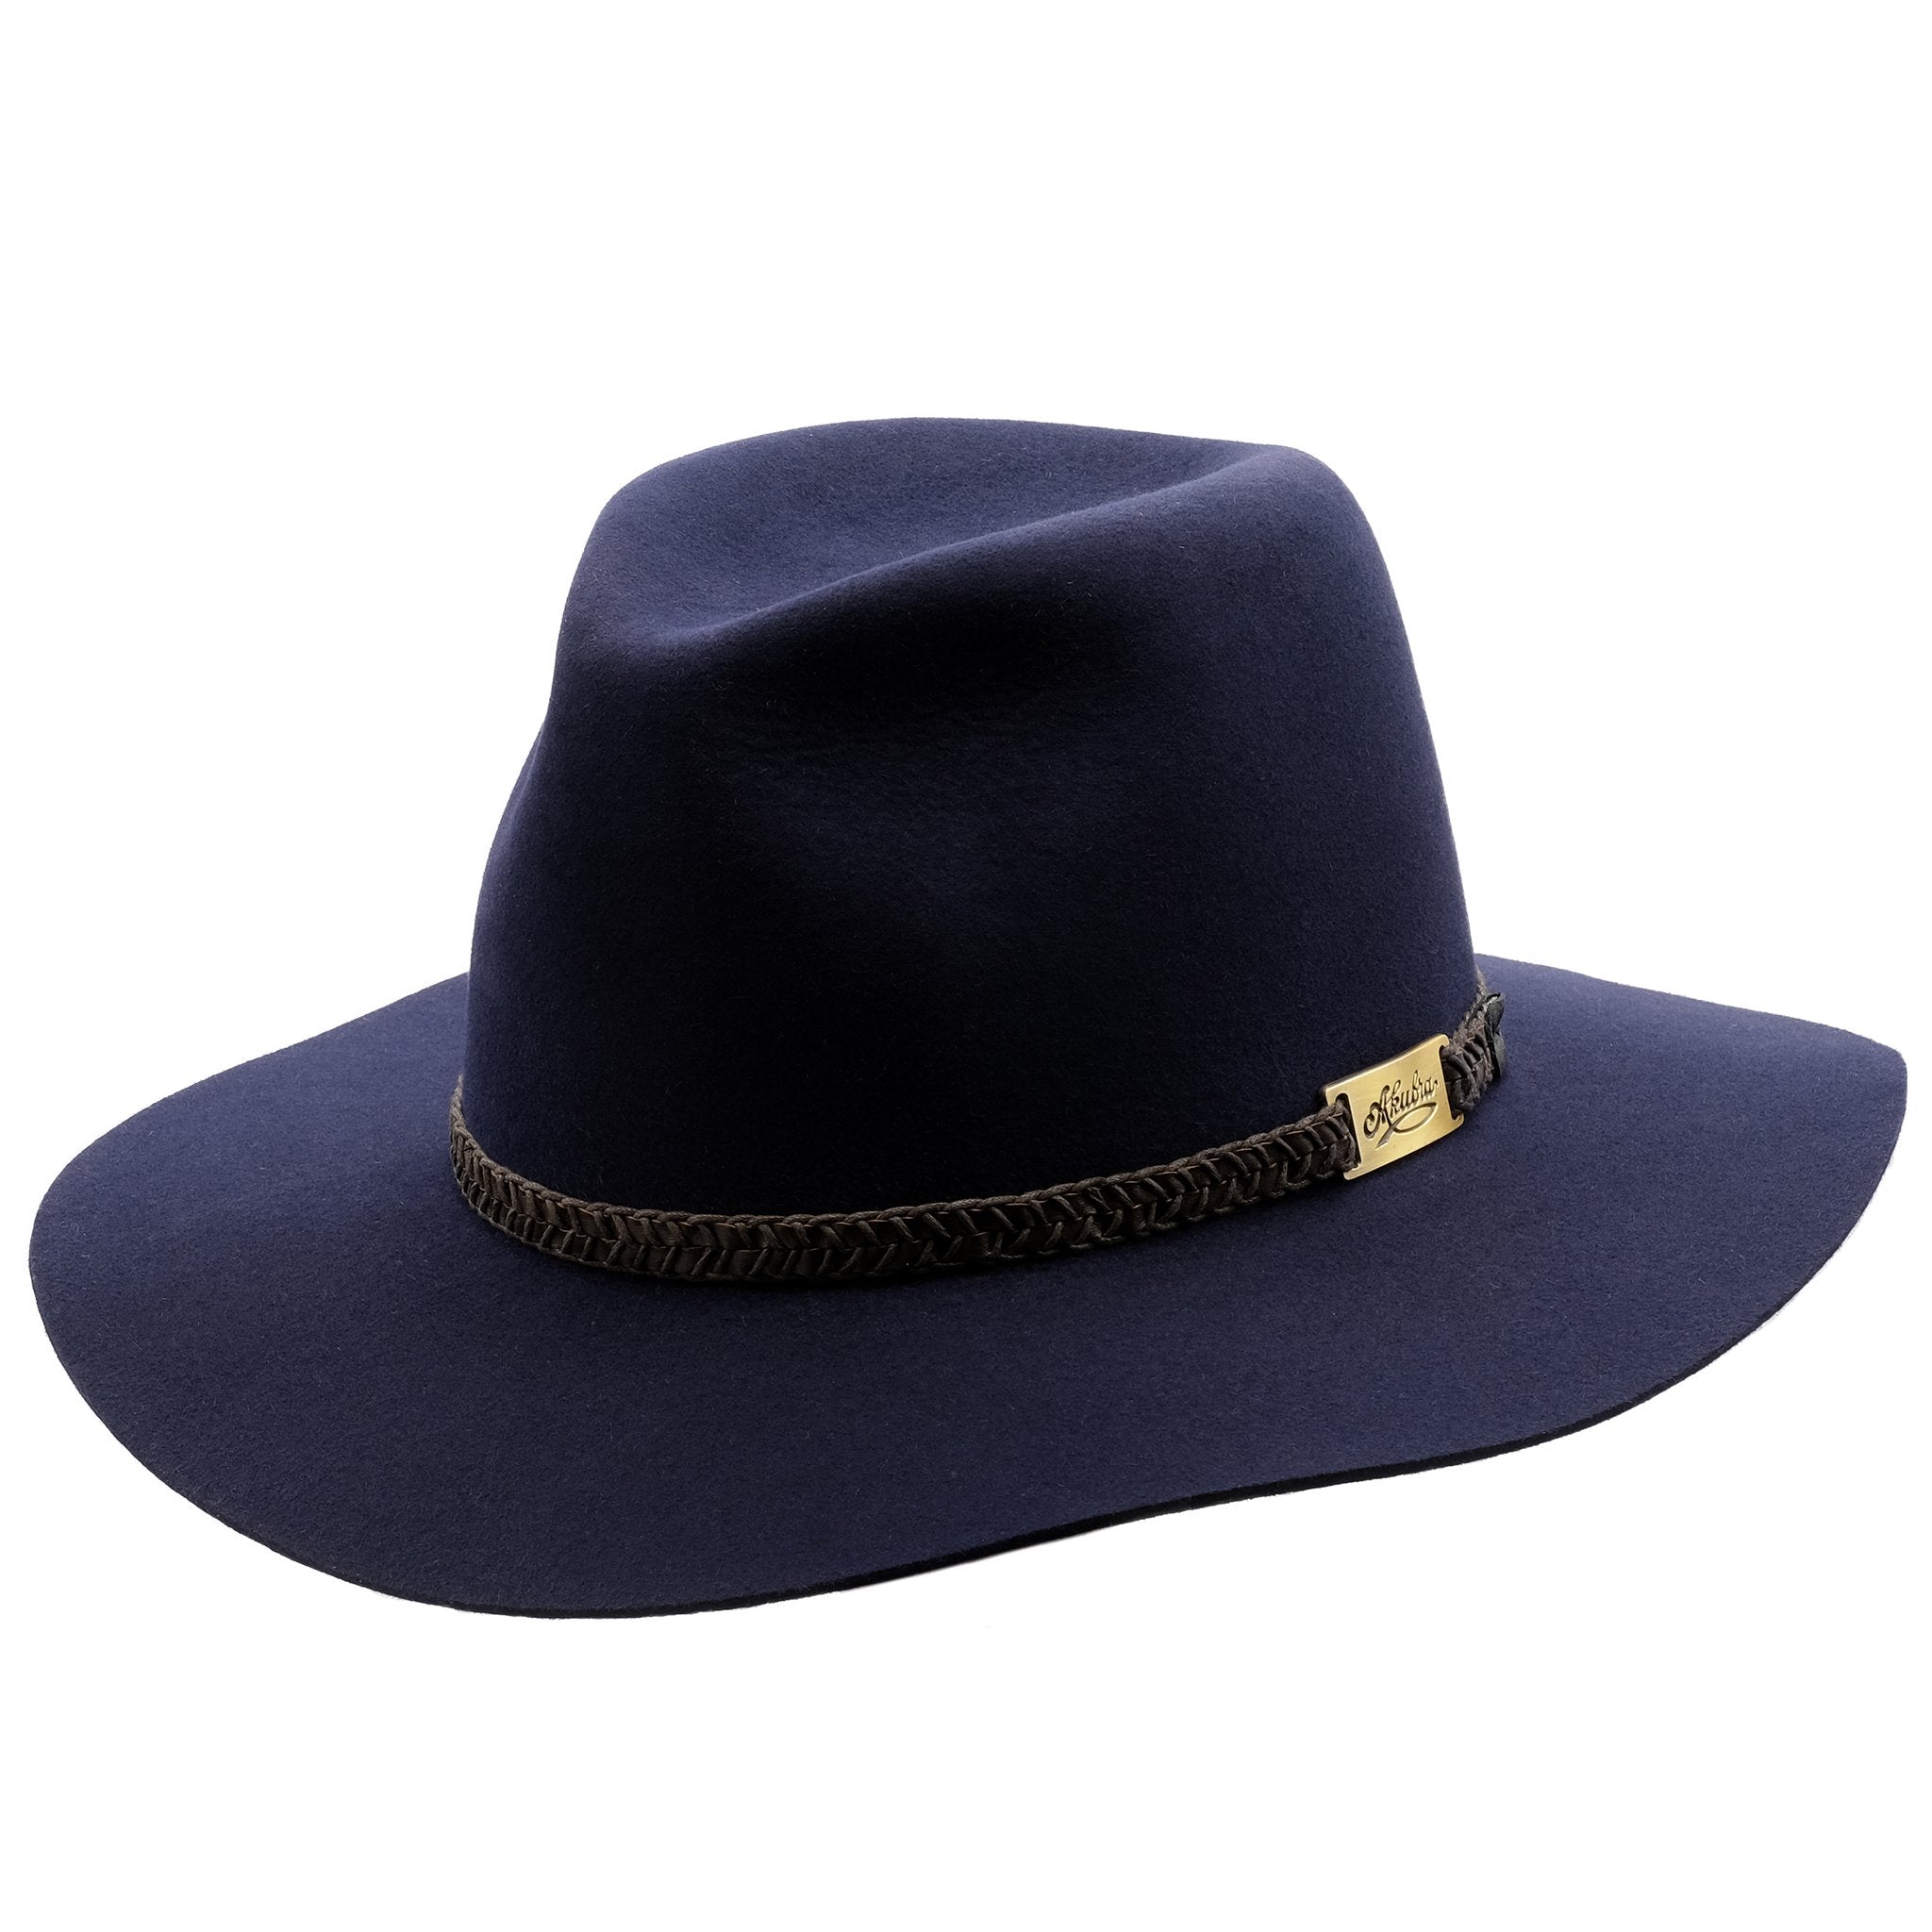 Angle view of the Akubra Avalon hat in Federation Navy colour